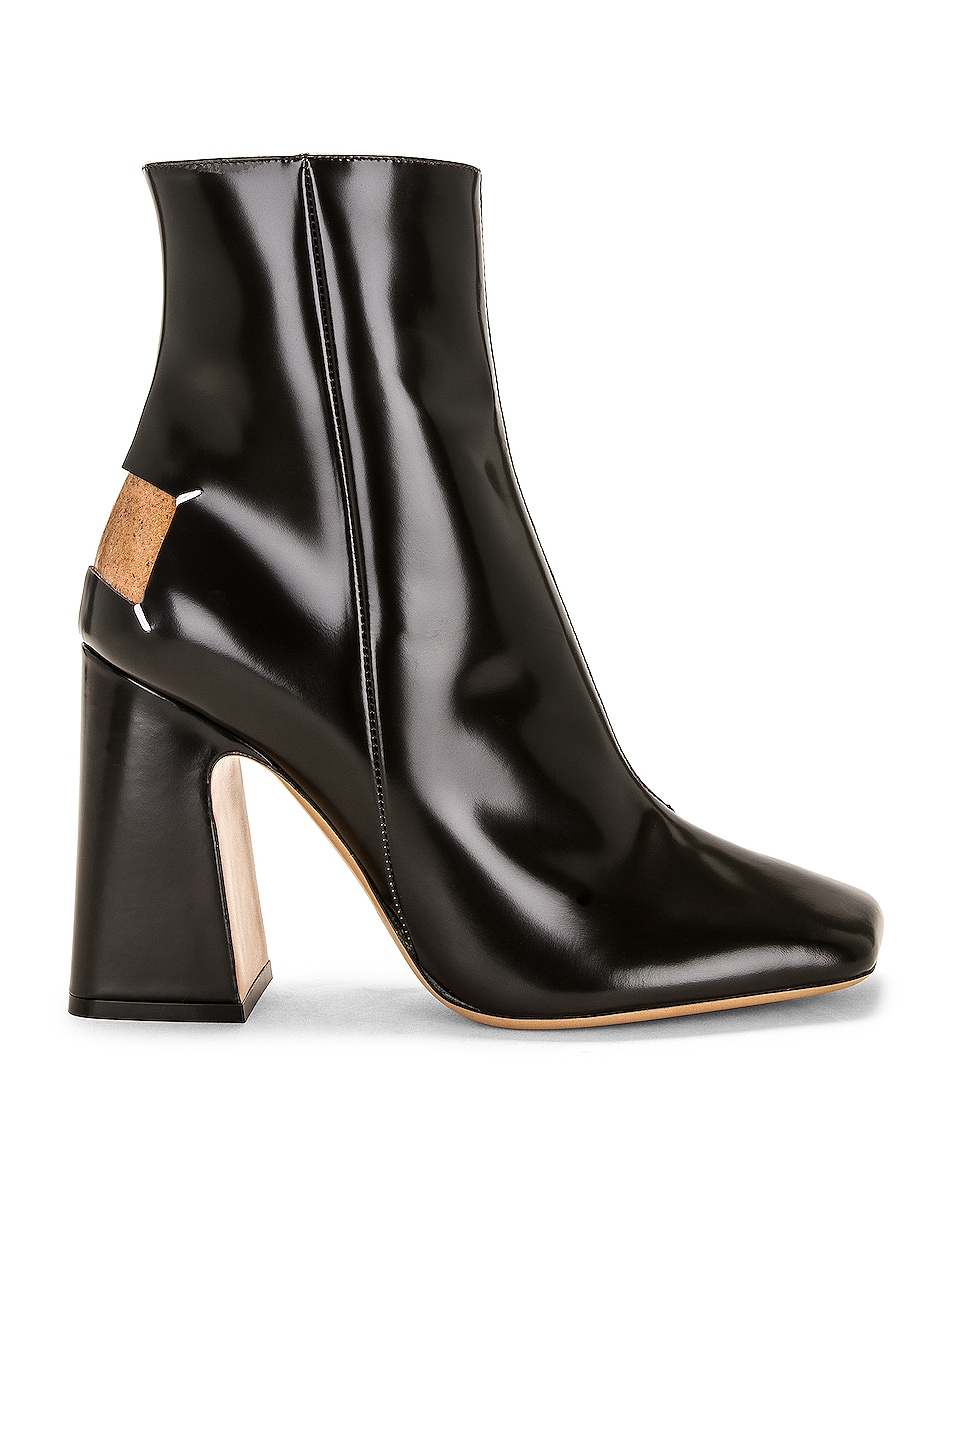 Image 1 of Maison Margiela Ankle Boot in Dark Brown